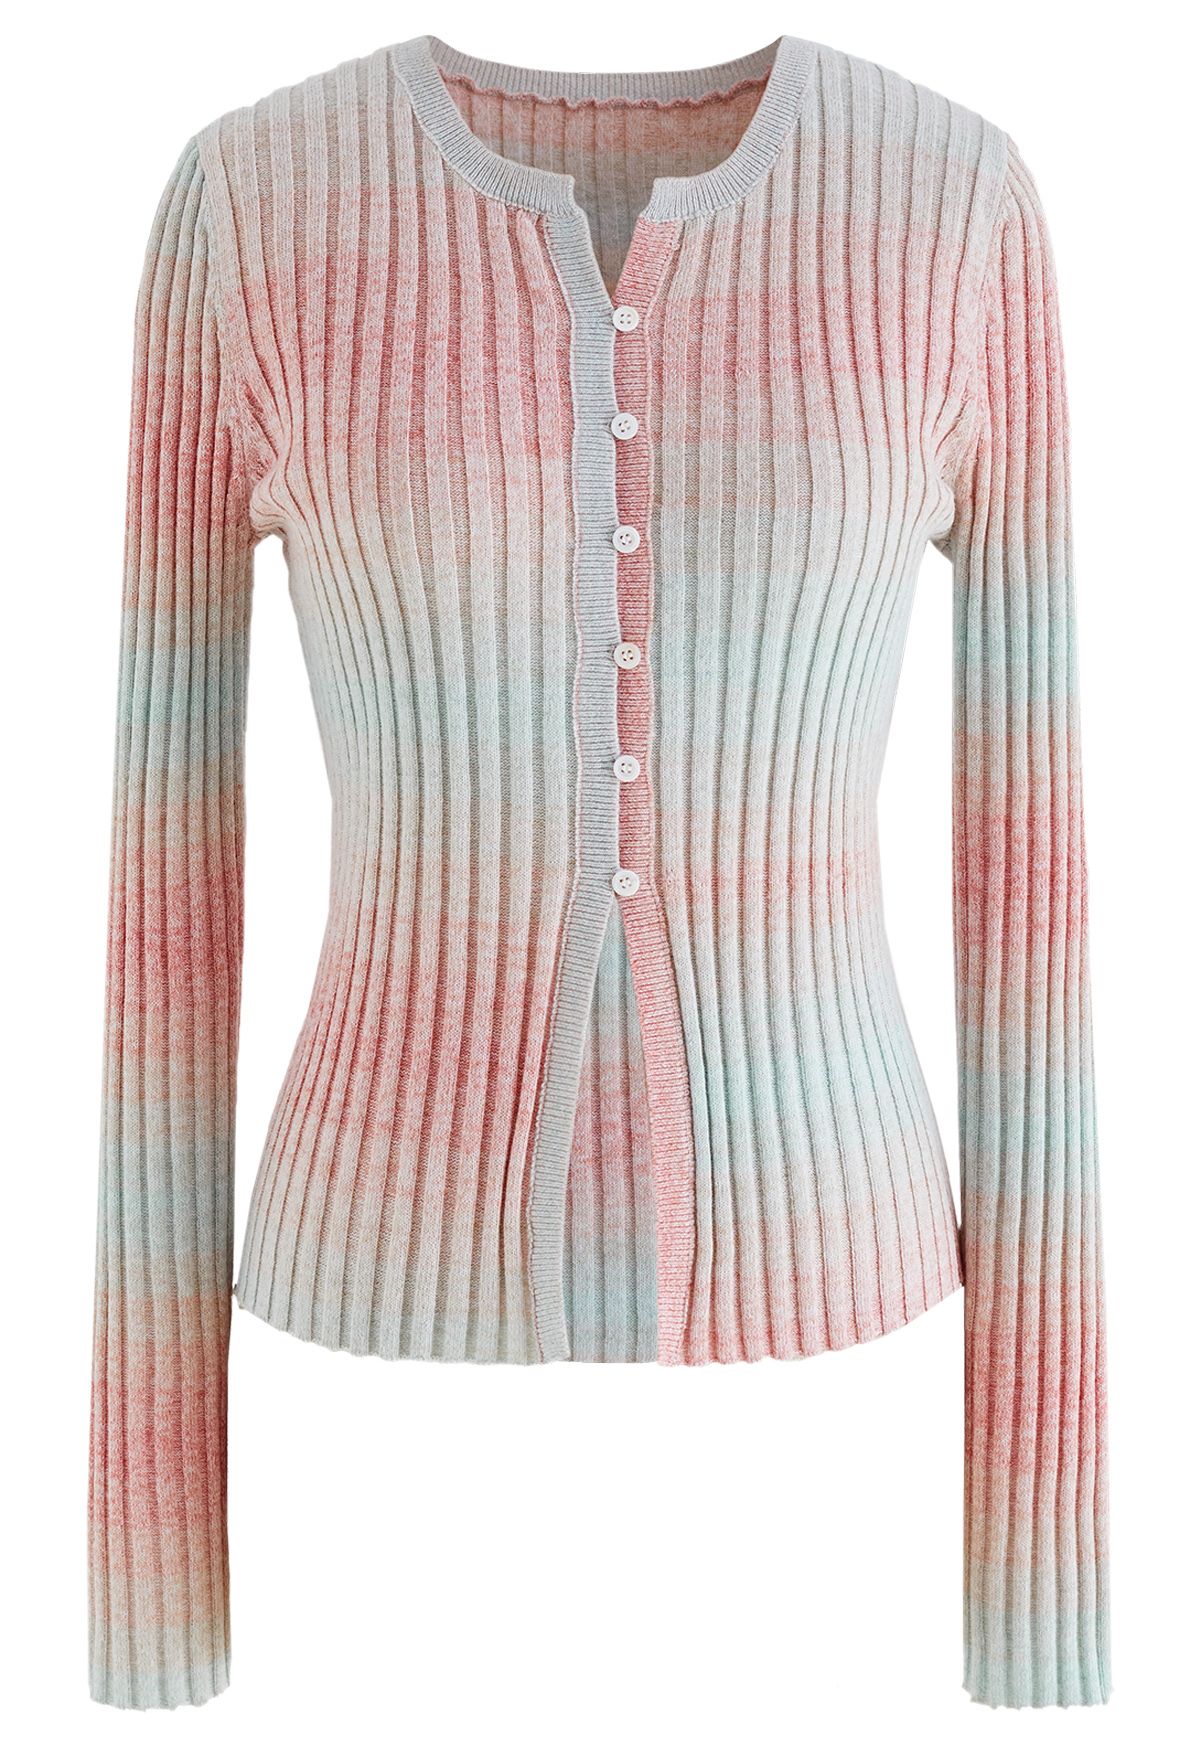 Ombre Rib Knit Button Up Top